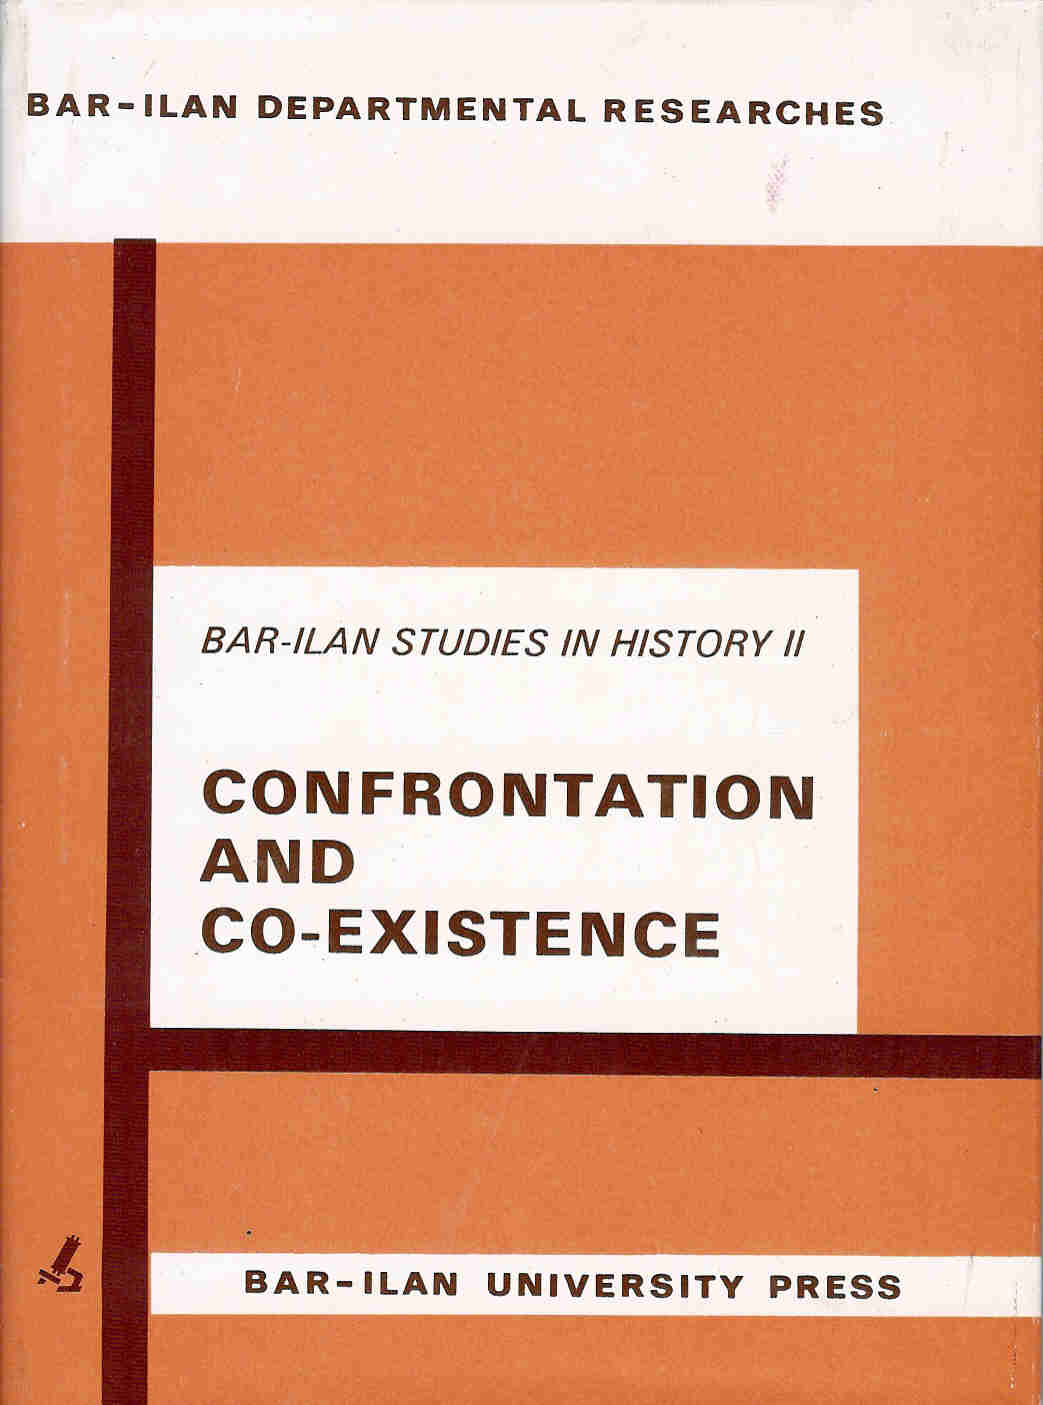 Bar-Ilan Studies in History II: Confrontation and Co-existence